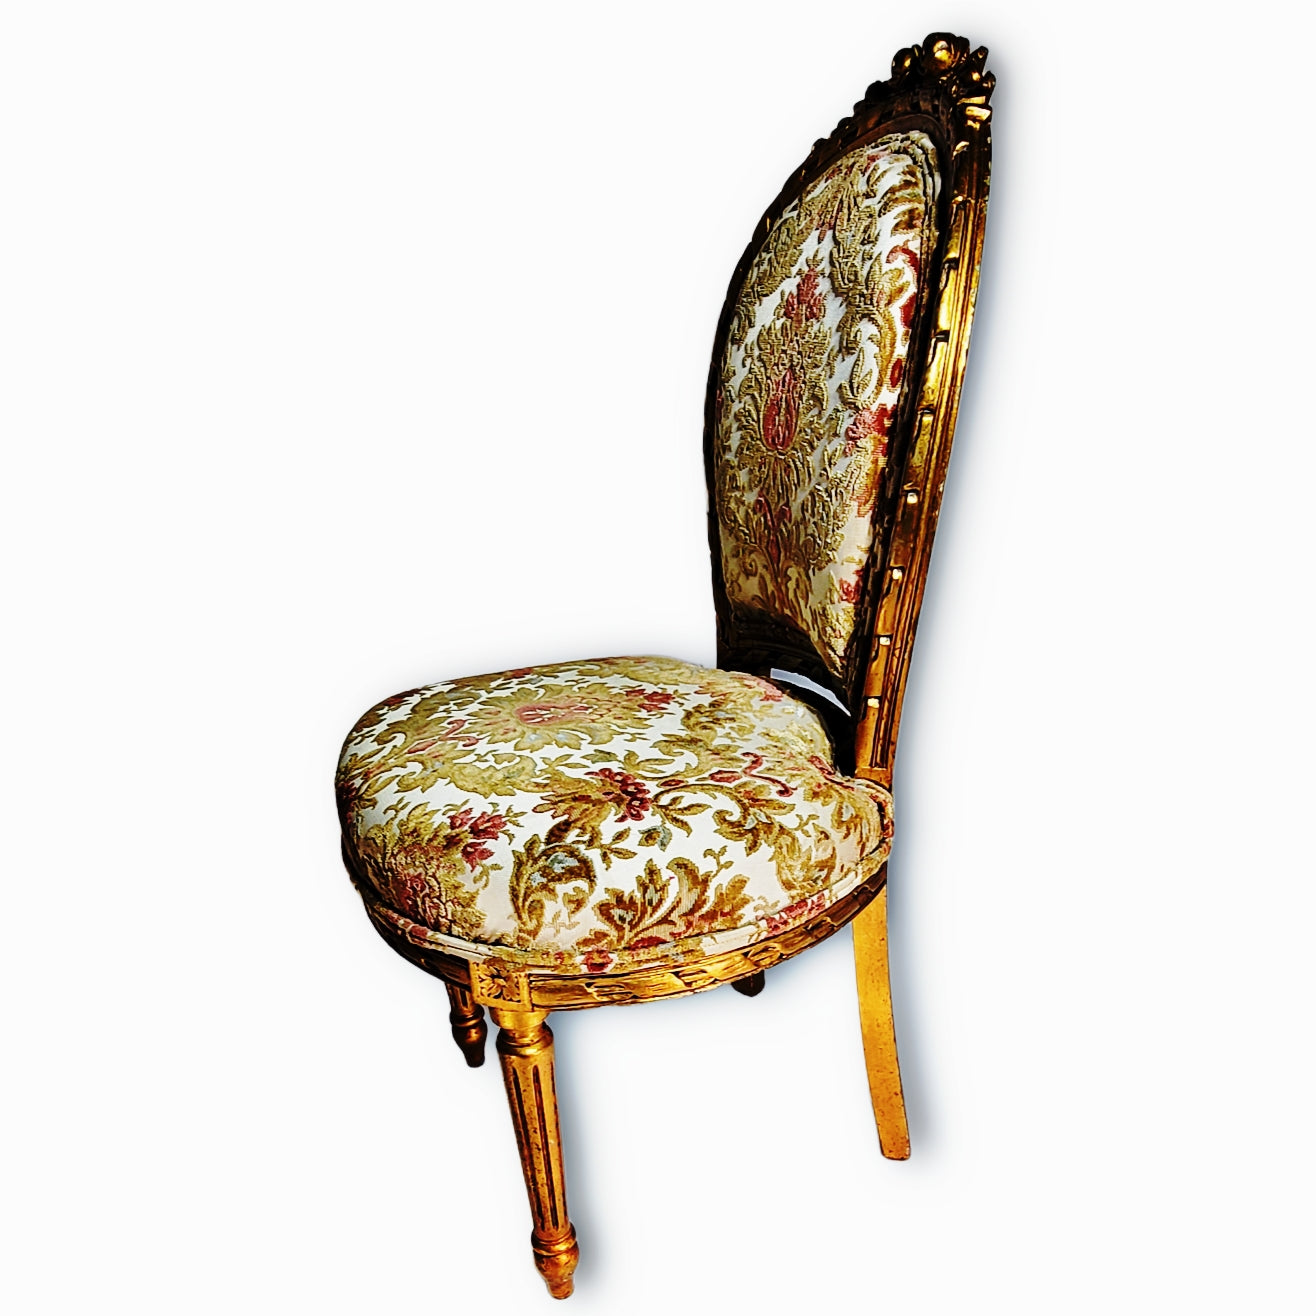 SOLD Ornate Gold Louis XVI Chairs (Set of 2)